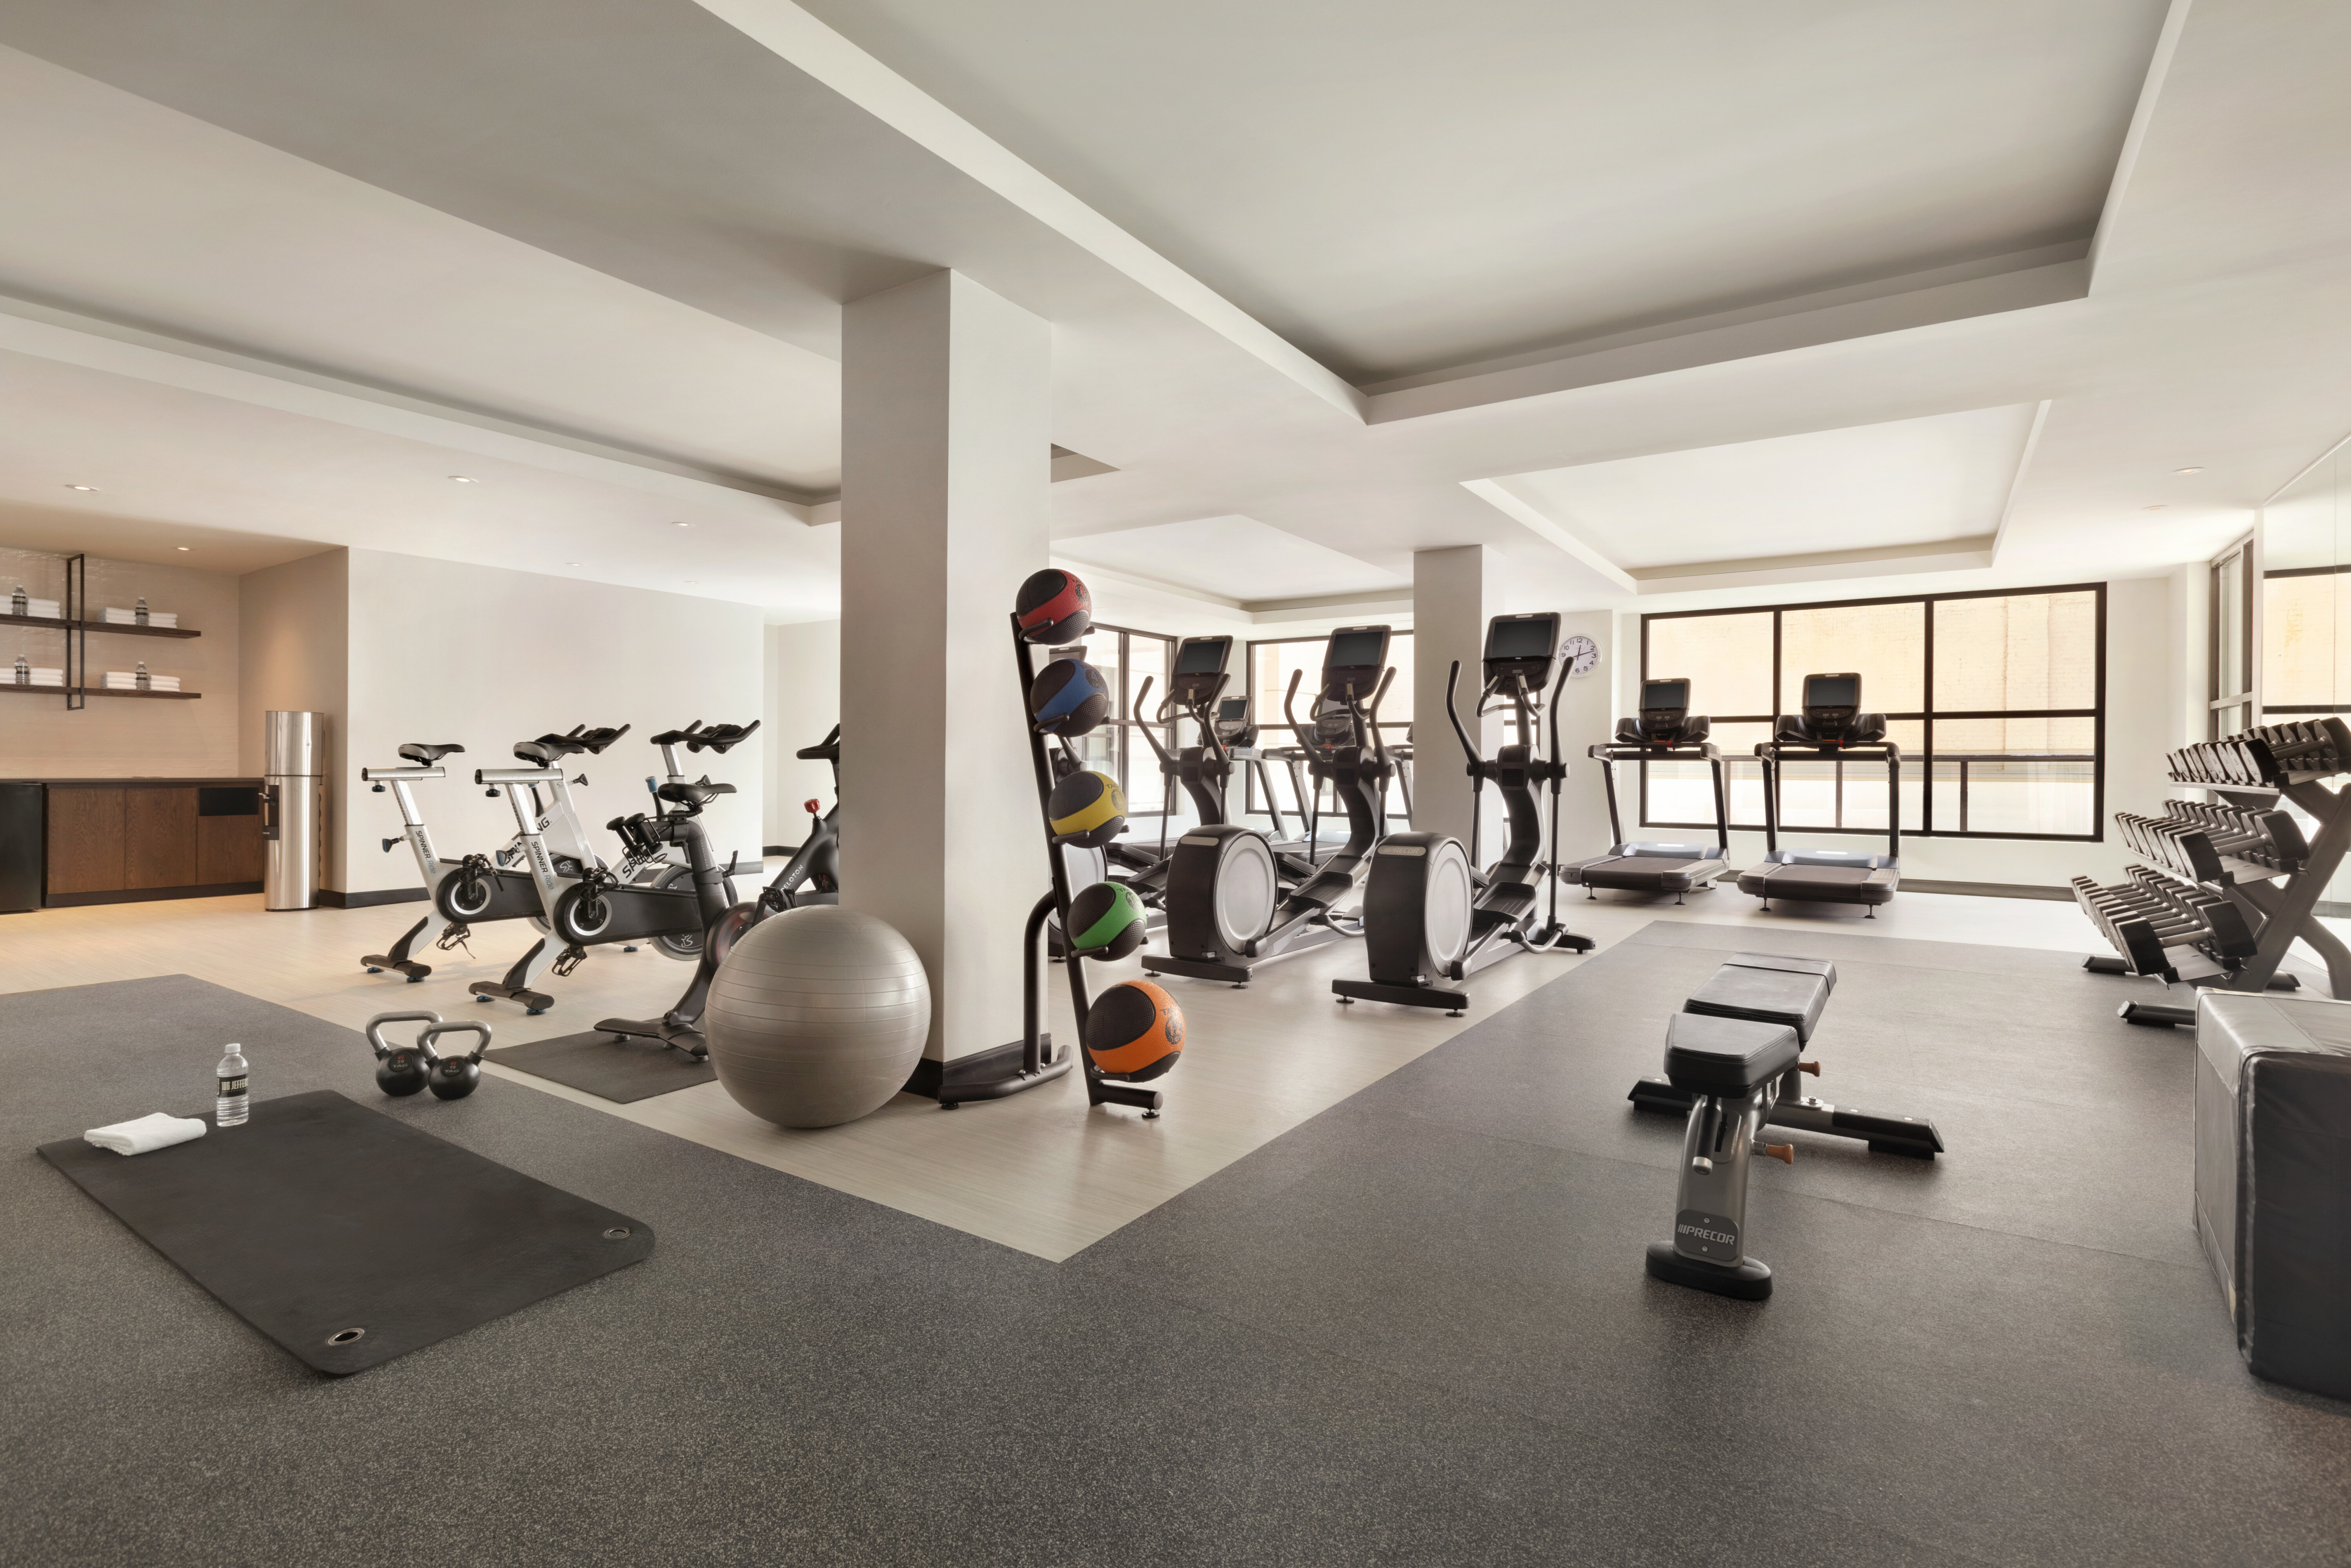 Fitness Room with Modern Equipment